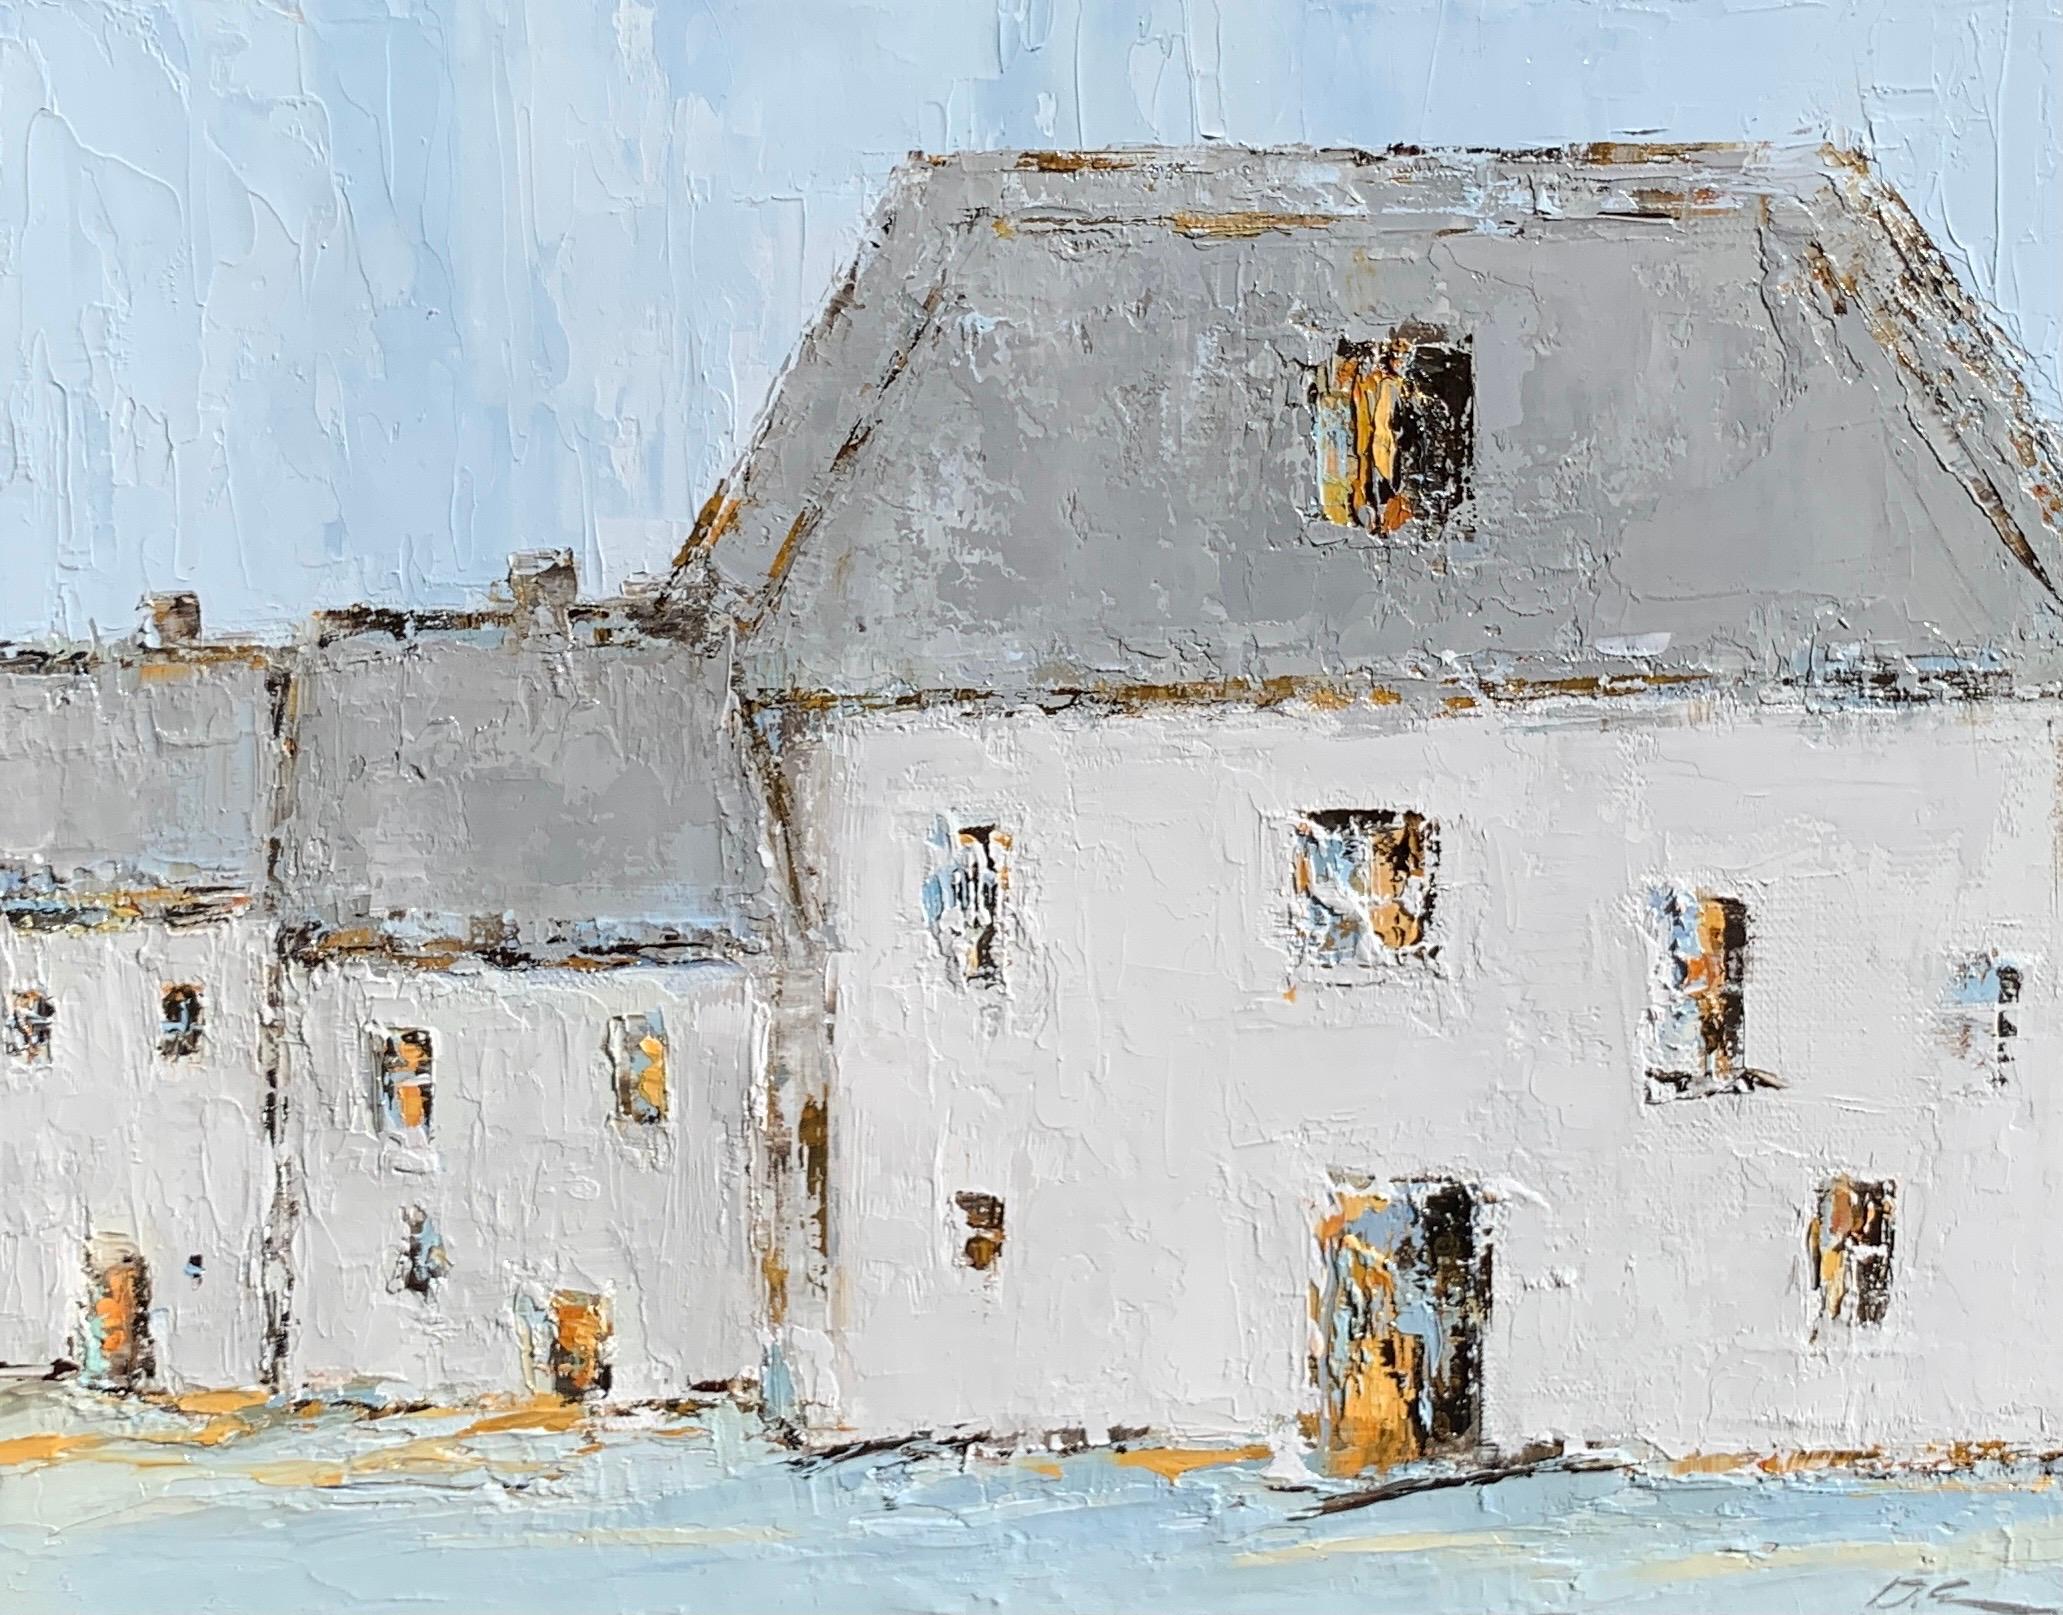 'French Cottage II' is a small framed oil on canvas Impressionist painting created by American artist Geri Eubanks in 2021. Featuring a soft palette made of white, grey, light blue and brown tones, the painting depicts in close view a large barn